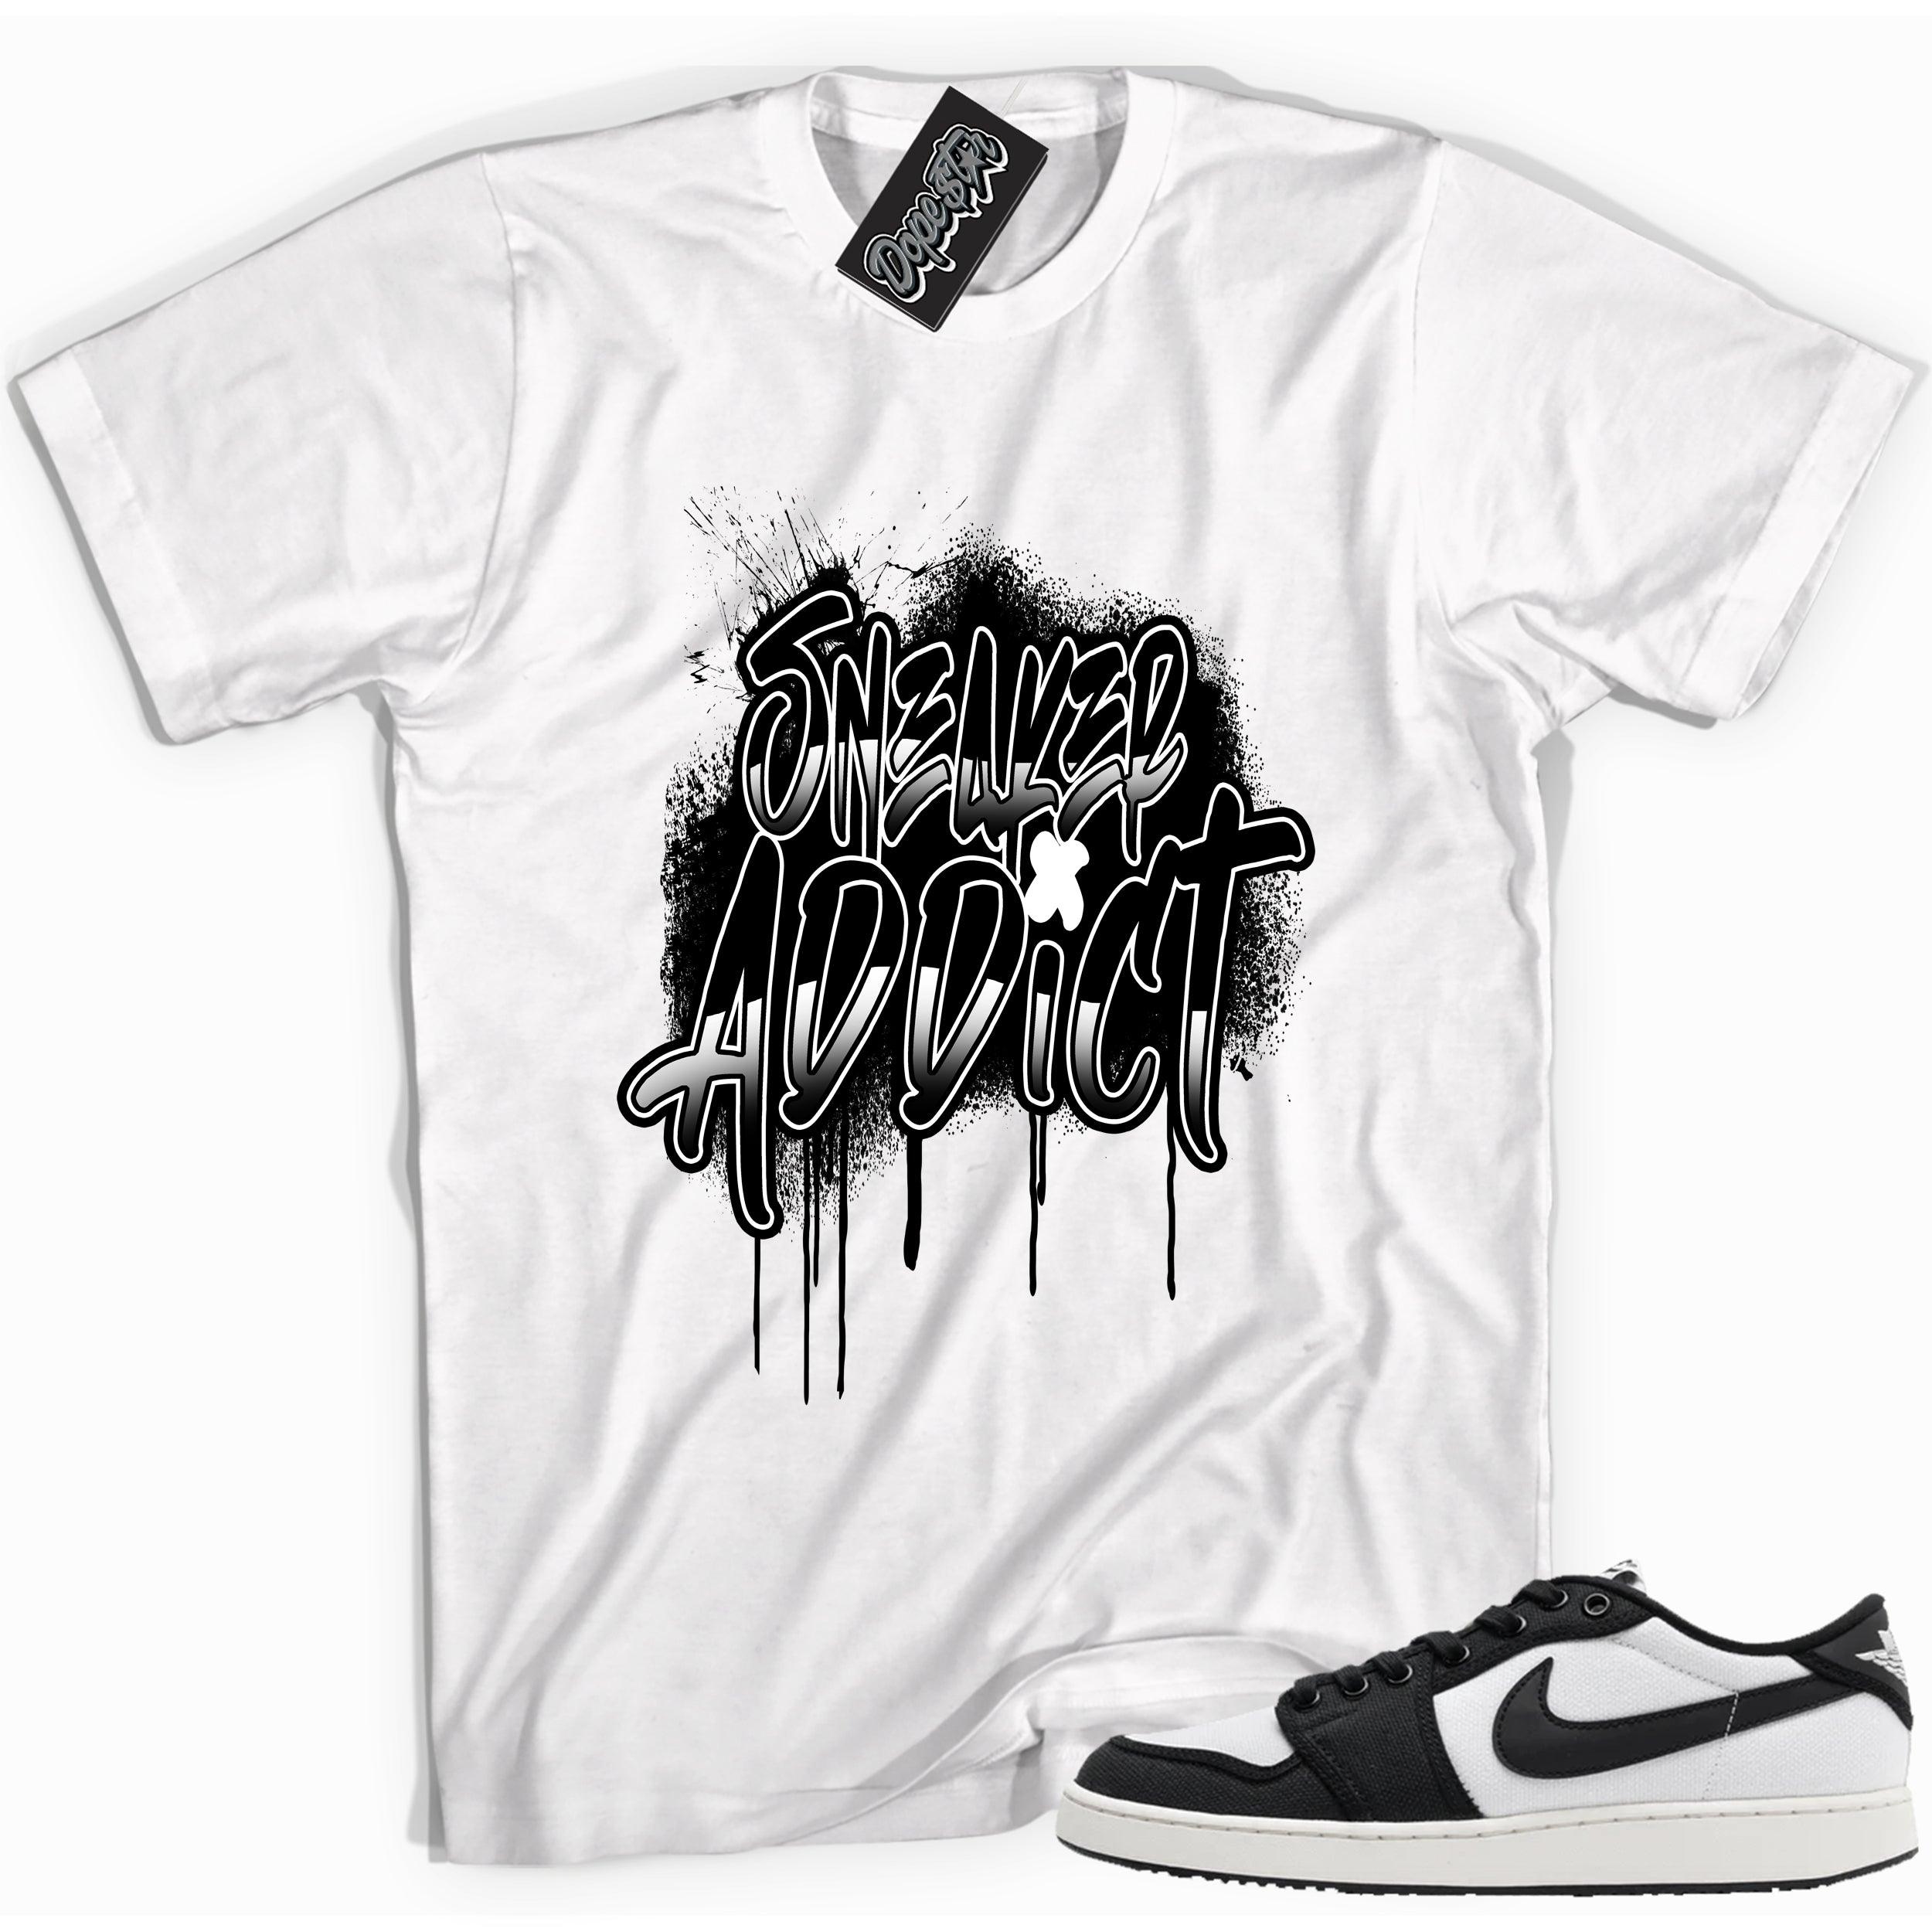 Cool white graphic tee with 'sneaker addict' print, that perfectly matches Air Jordan 1 Retro Ajko Low Black & White sneakers.